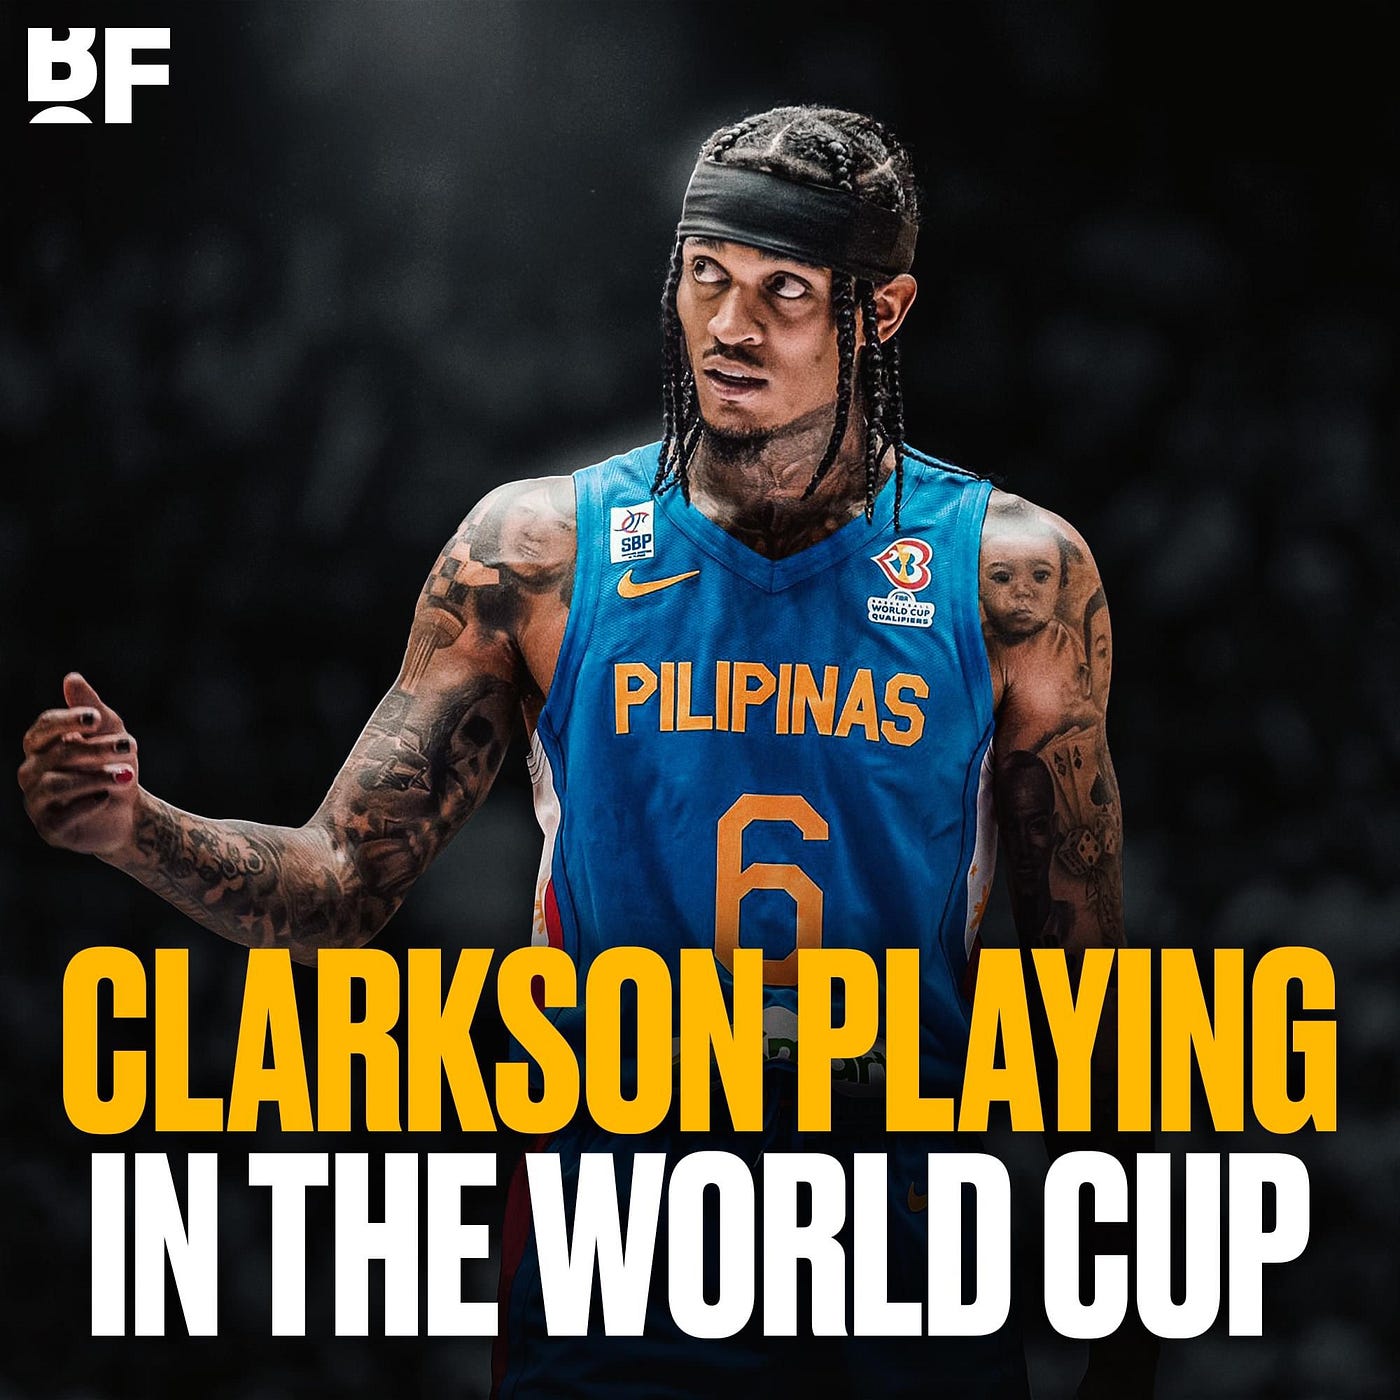 Jordan Clarkson commits to play for Gilas Pilipinas in the FIBA World Cup